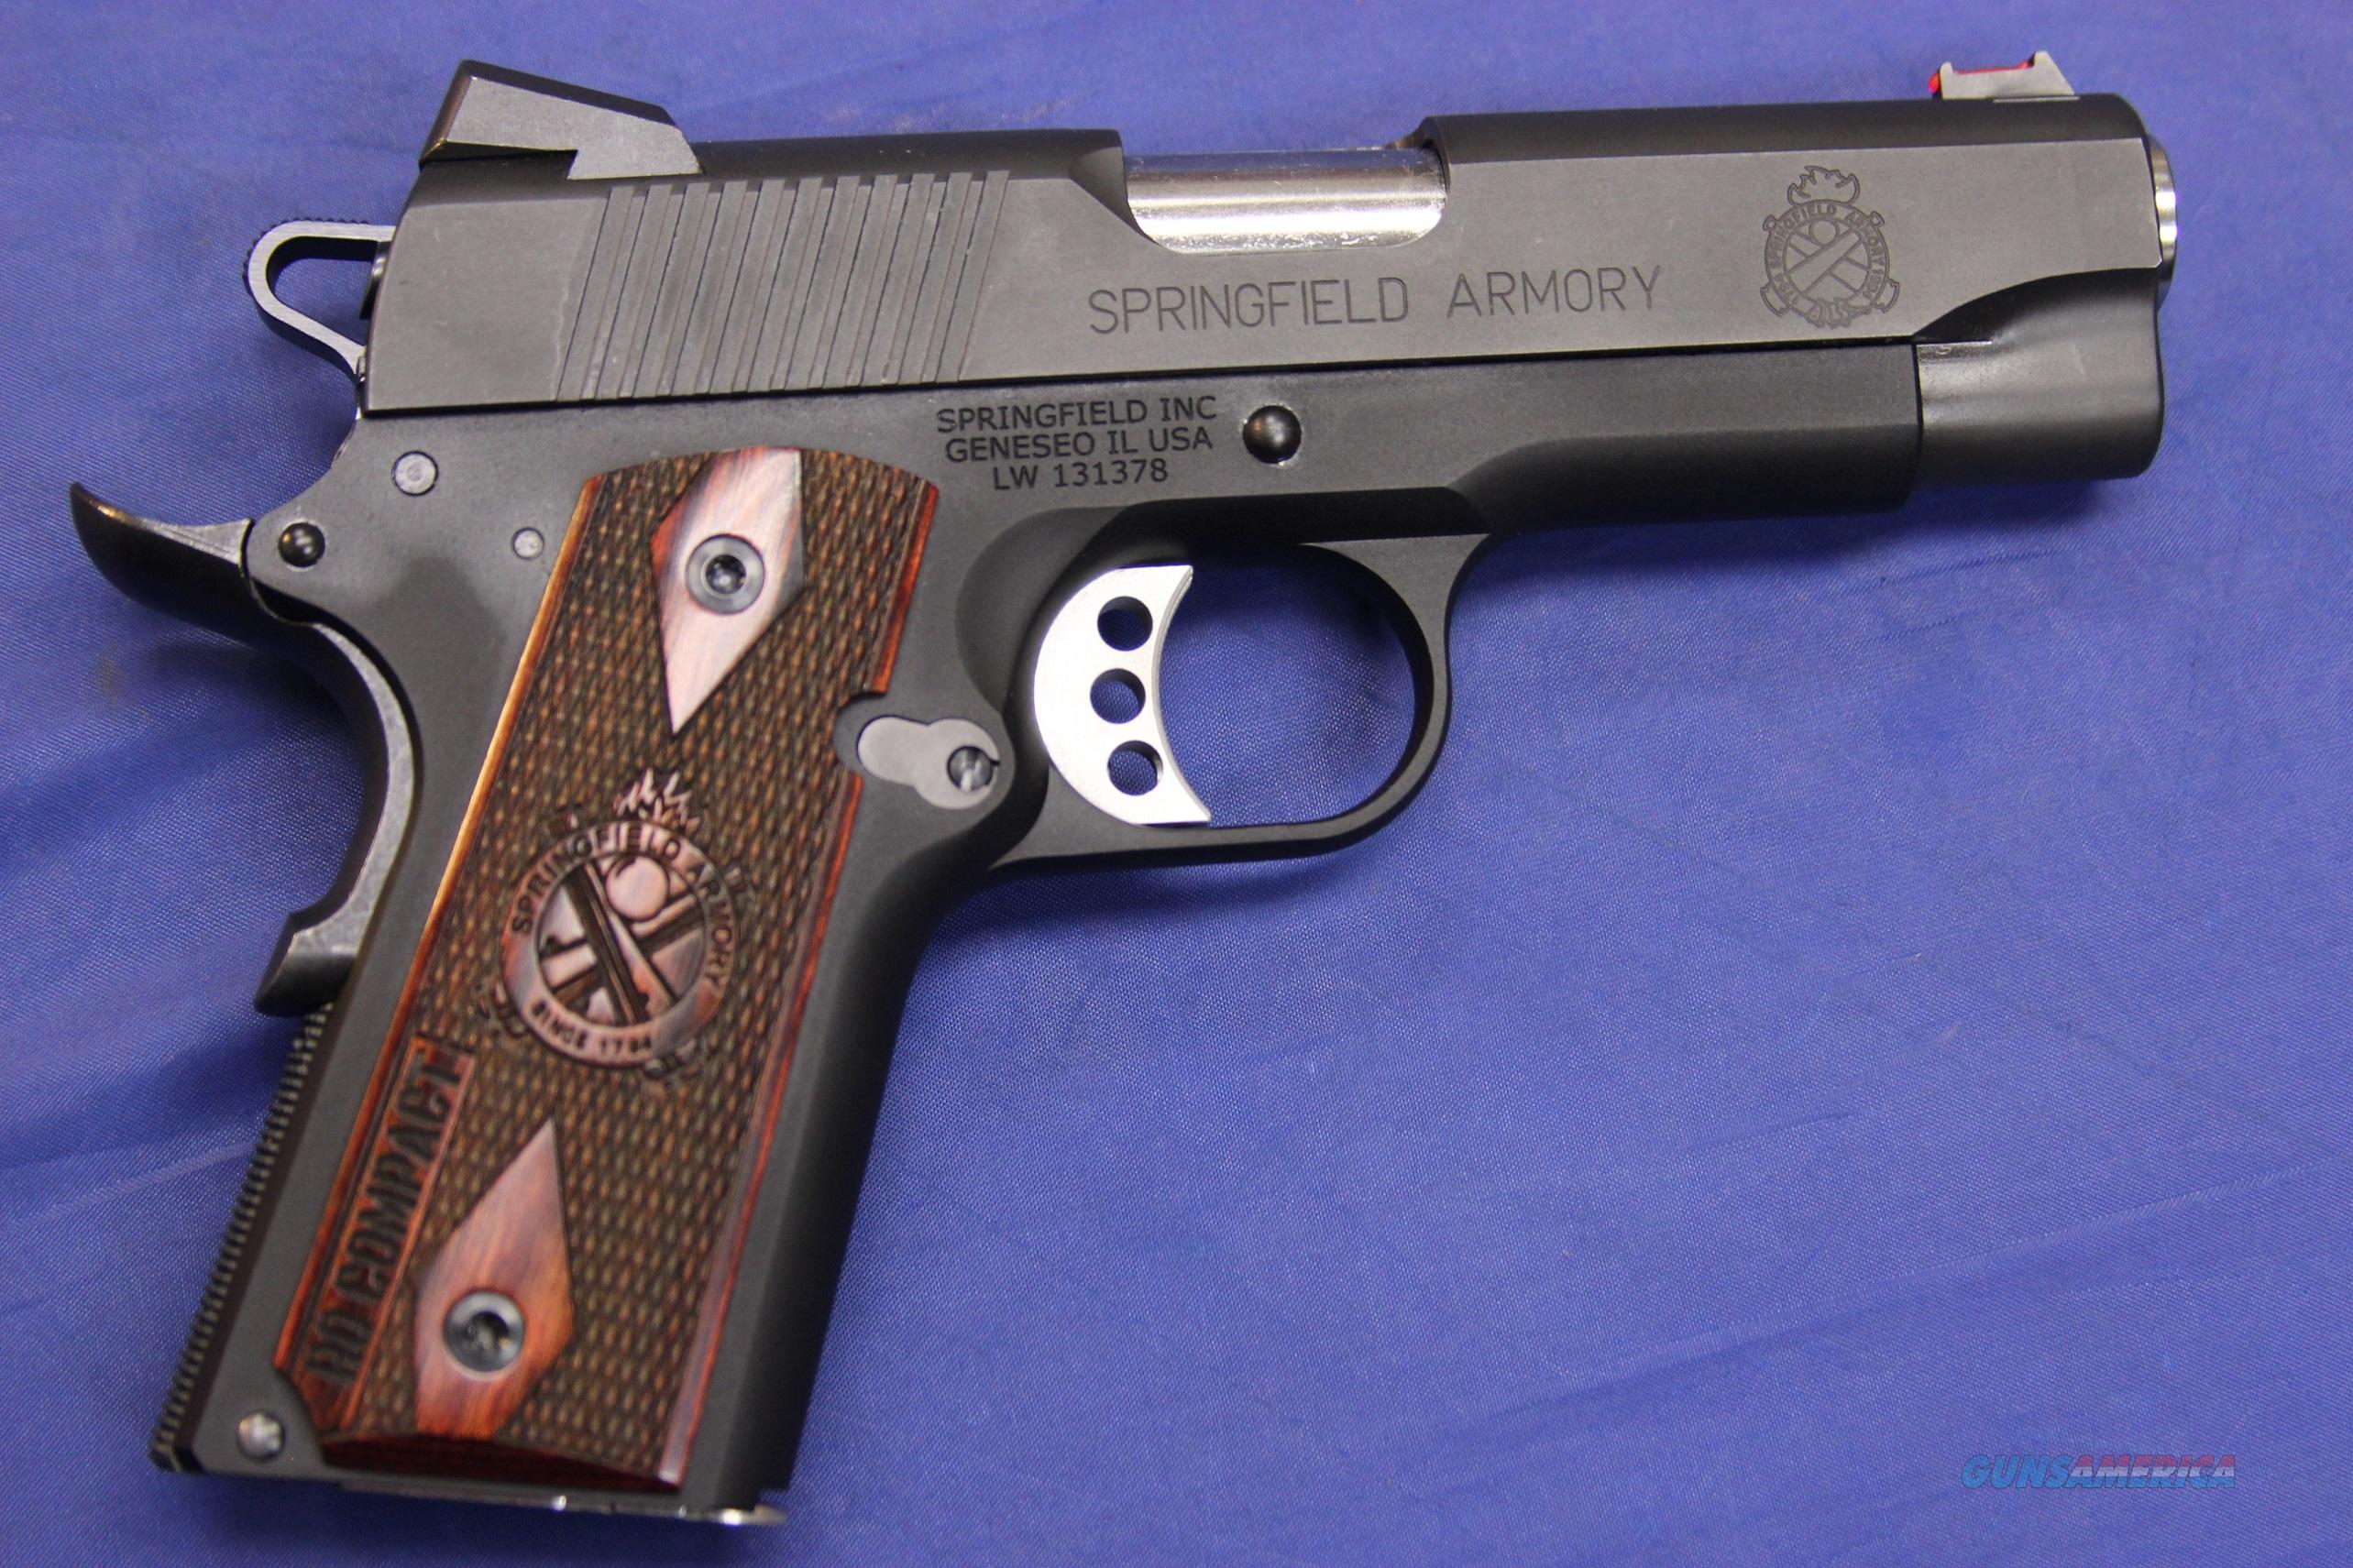 1911 range officer compact 9mm